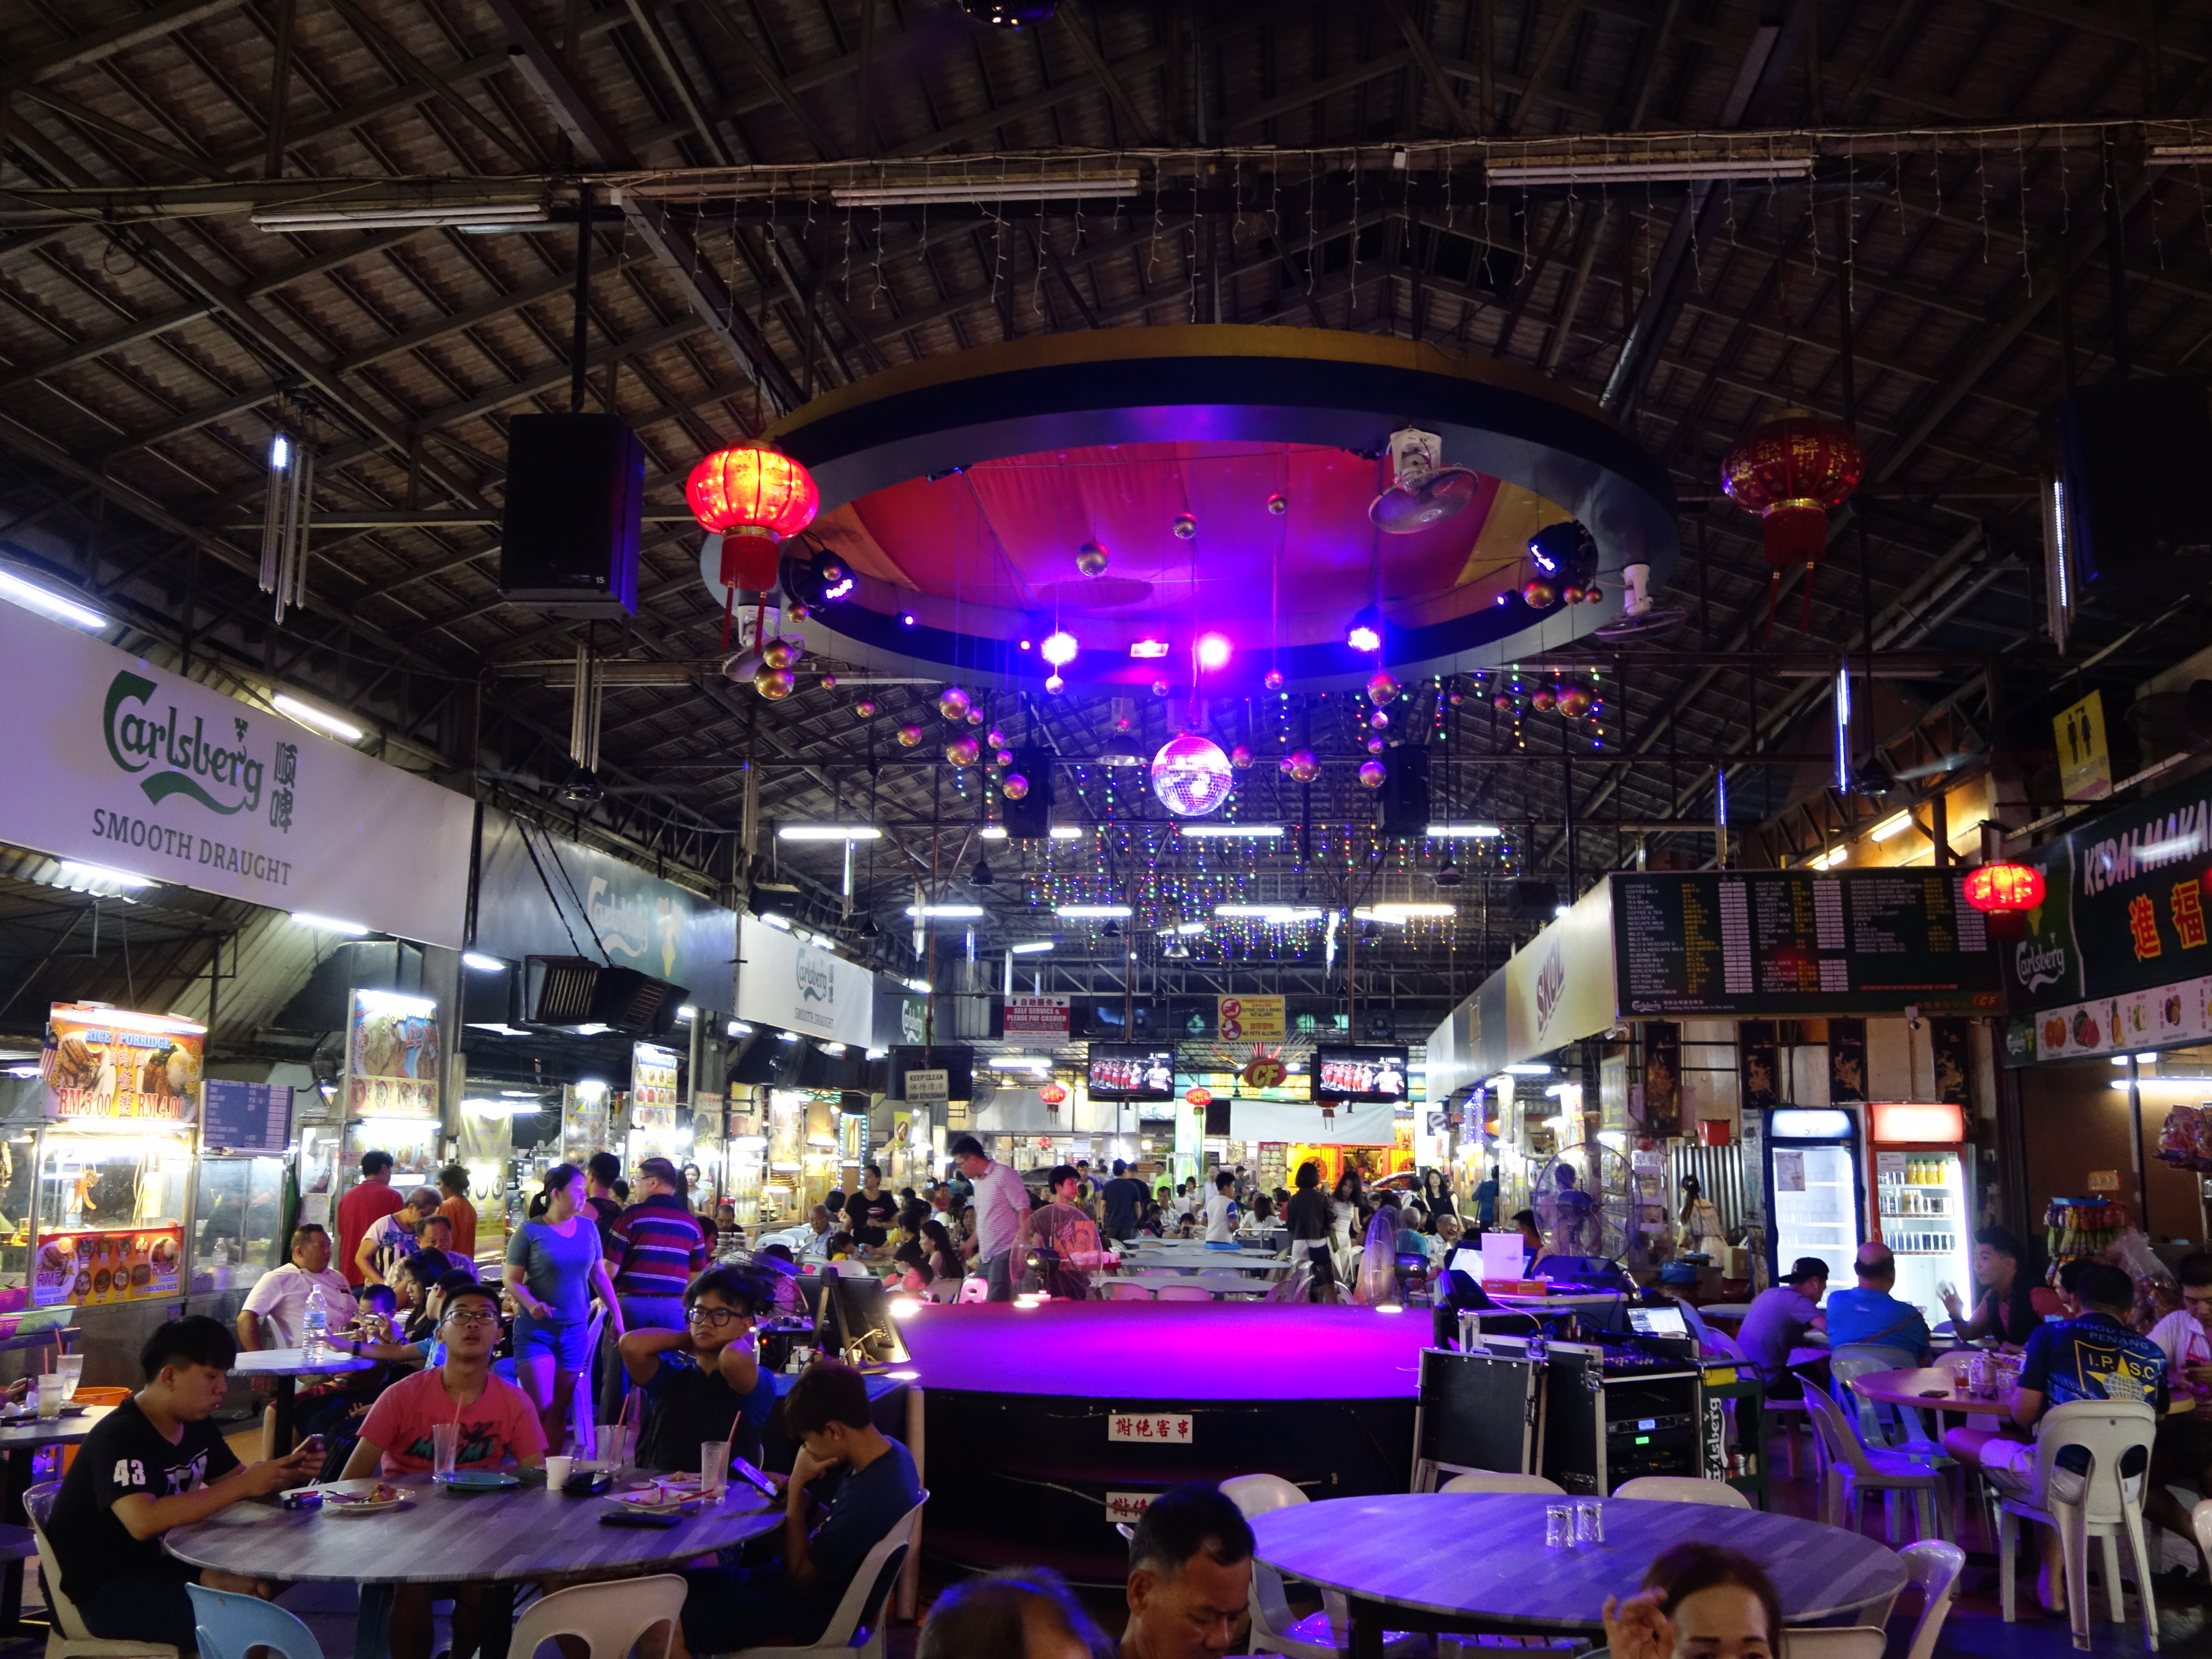 CF Market food stalls. Guide for first trip to Penang - Wediditourway.com